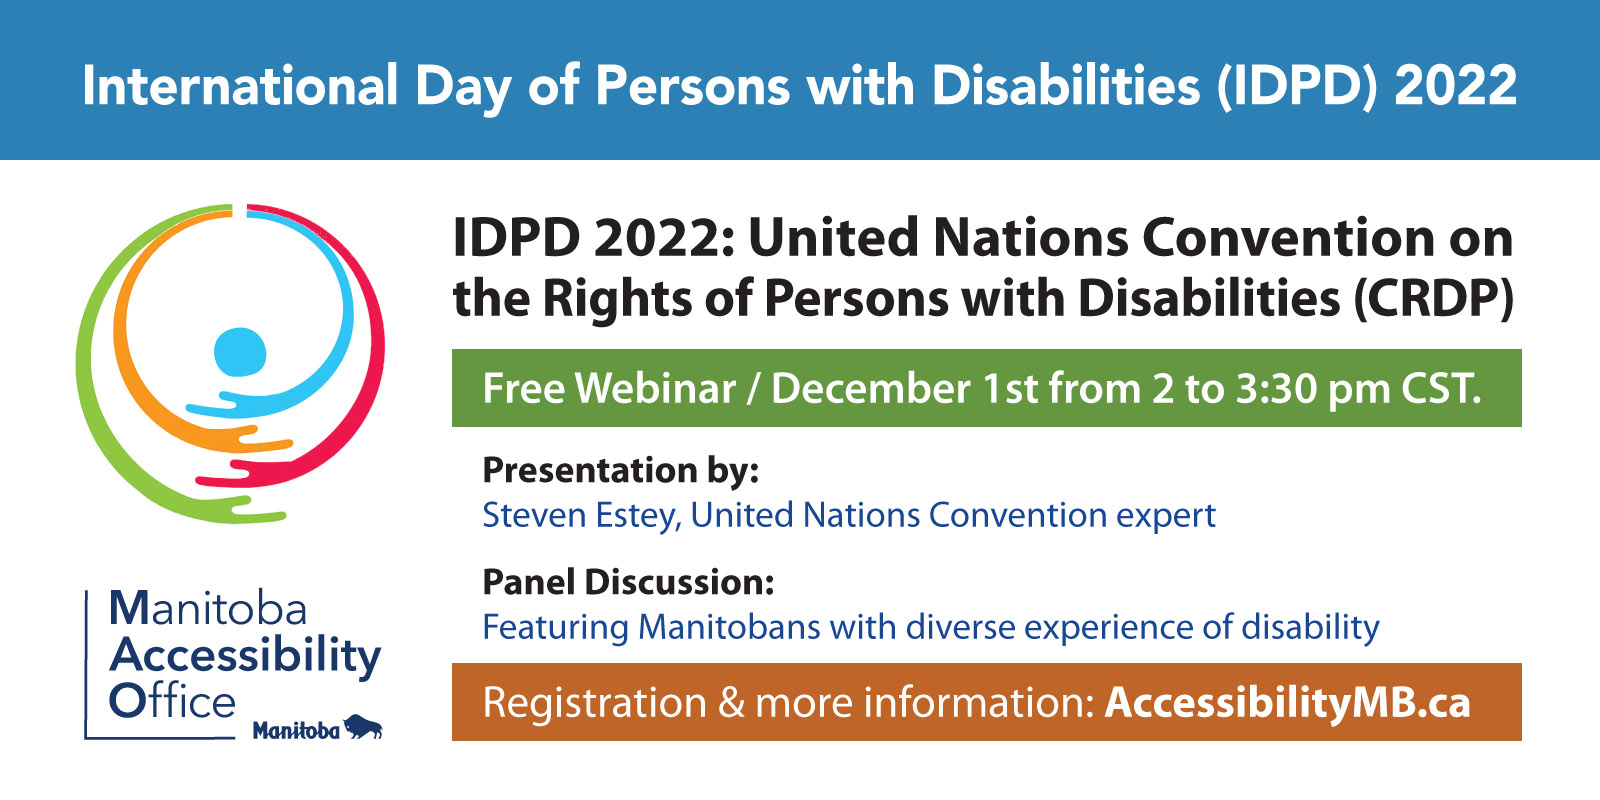 IDPD 2022 Event Poster